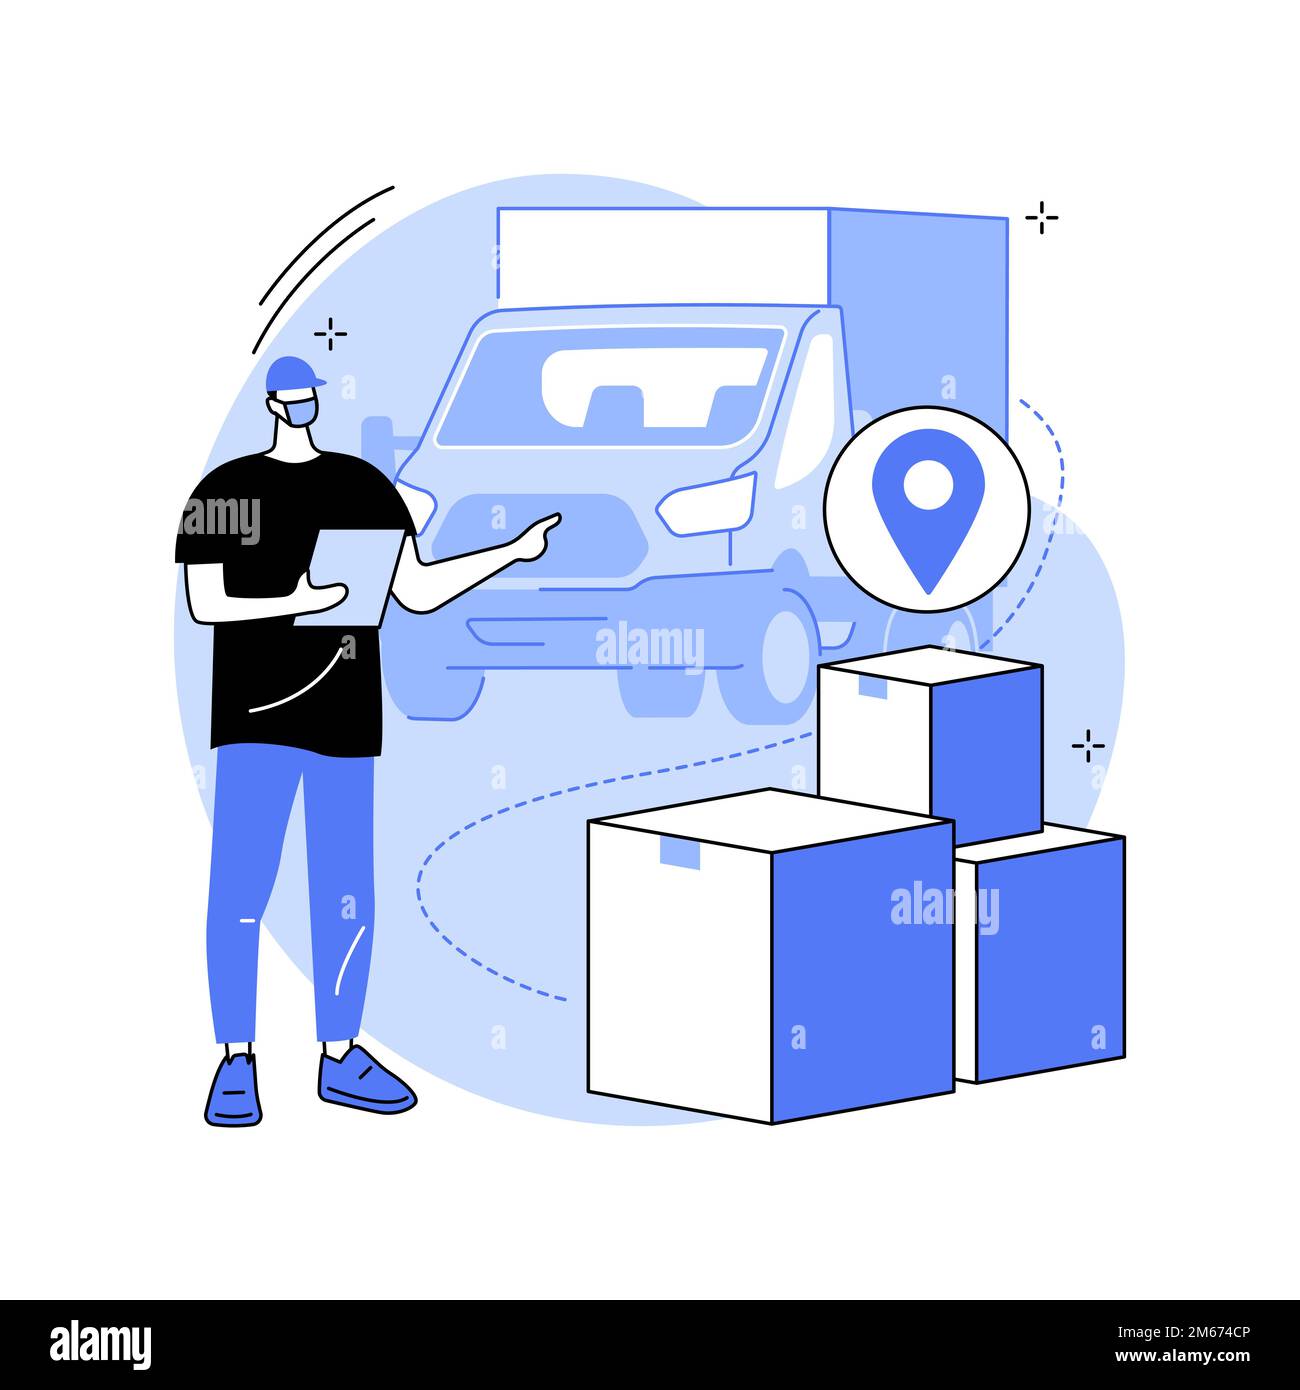 No-contact pick up and delivery abstract concept vector illustration. virus safe delivery, protected transport service, COVID-19 business tranformatio Stock Vector